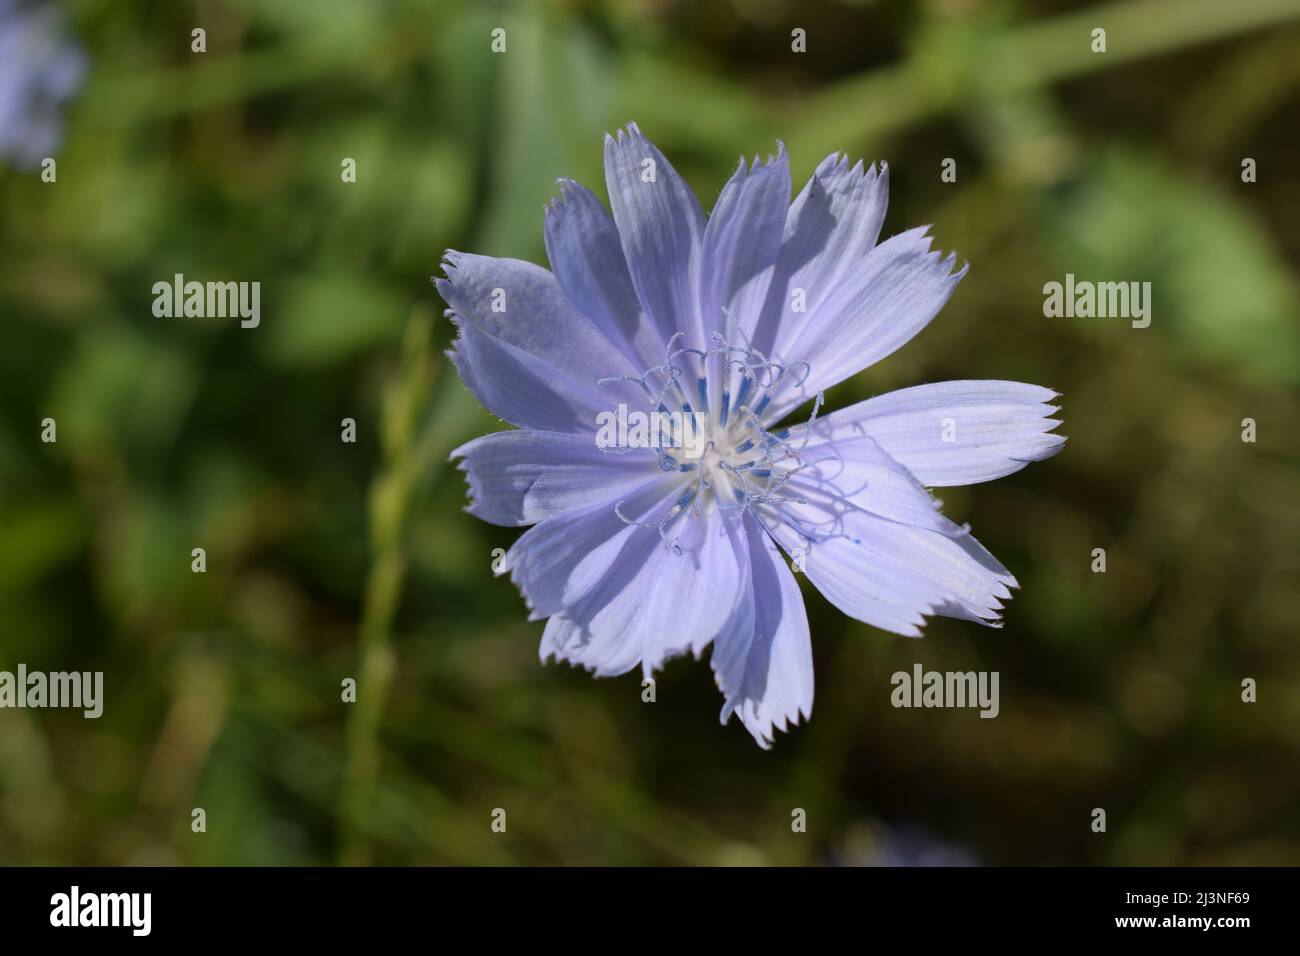 Common Chicory or Cichorium intybus flower blossoms commonly called blue sailors, chicory, coffee weed, or succory is a herbaceous perennial plant. Stock Photo